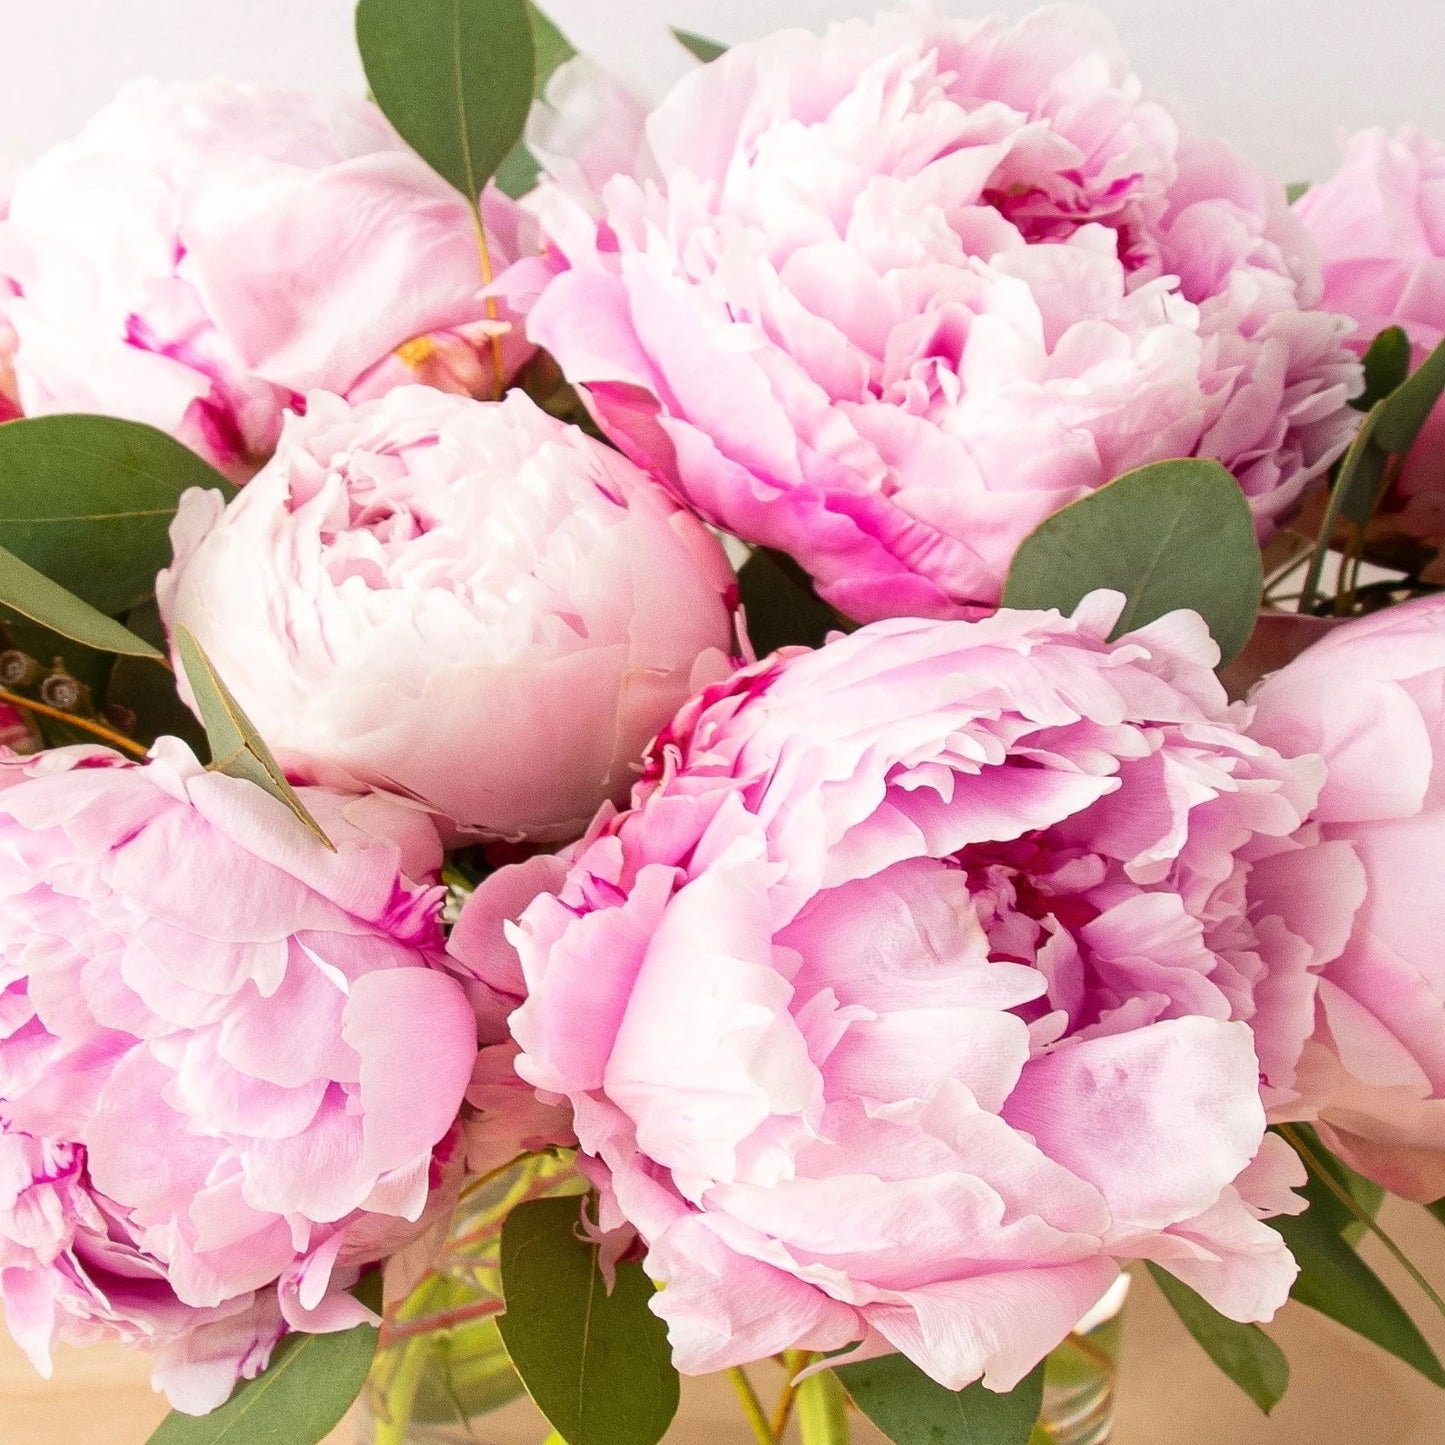 For spring, gorgeous soft pink peonies! Peonies are complimented with seeded eucalyptus in this exquisite arrangement in a clear glass vase.